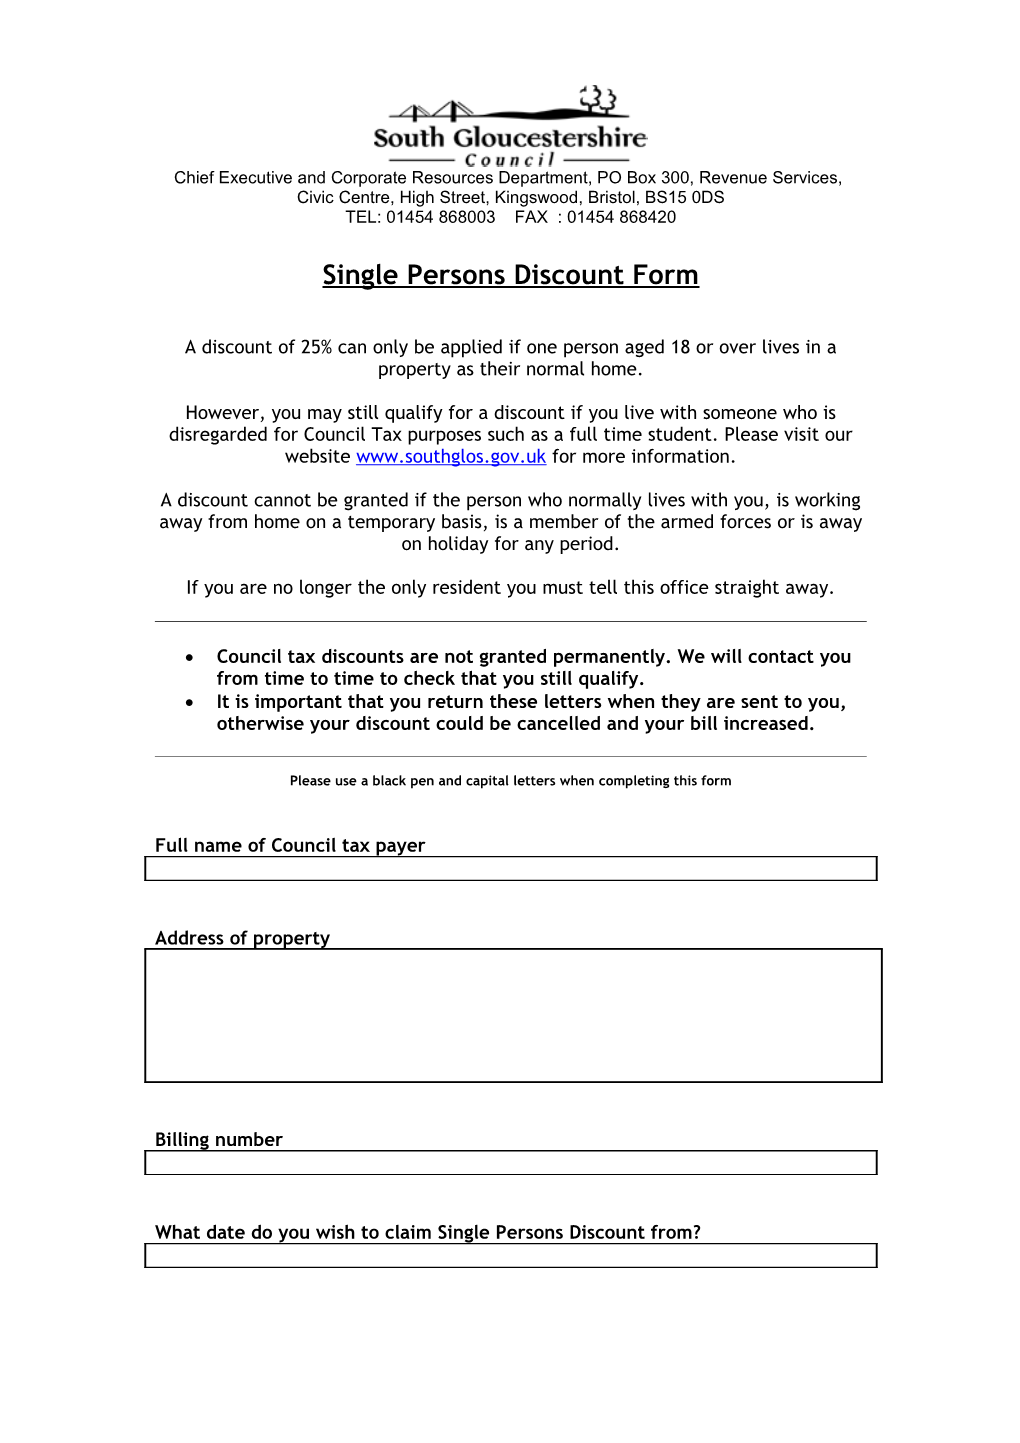 Application for a Single Persons Discount